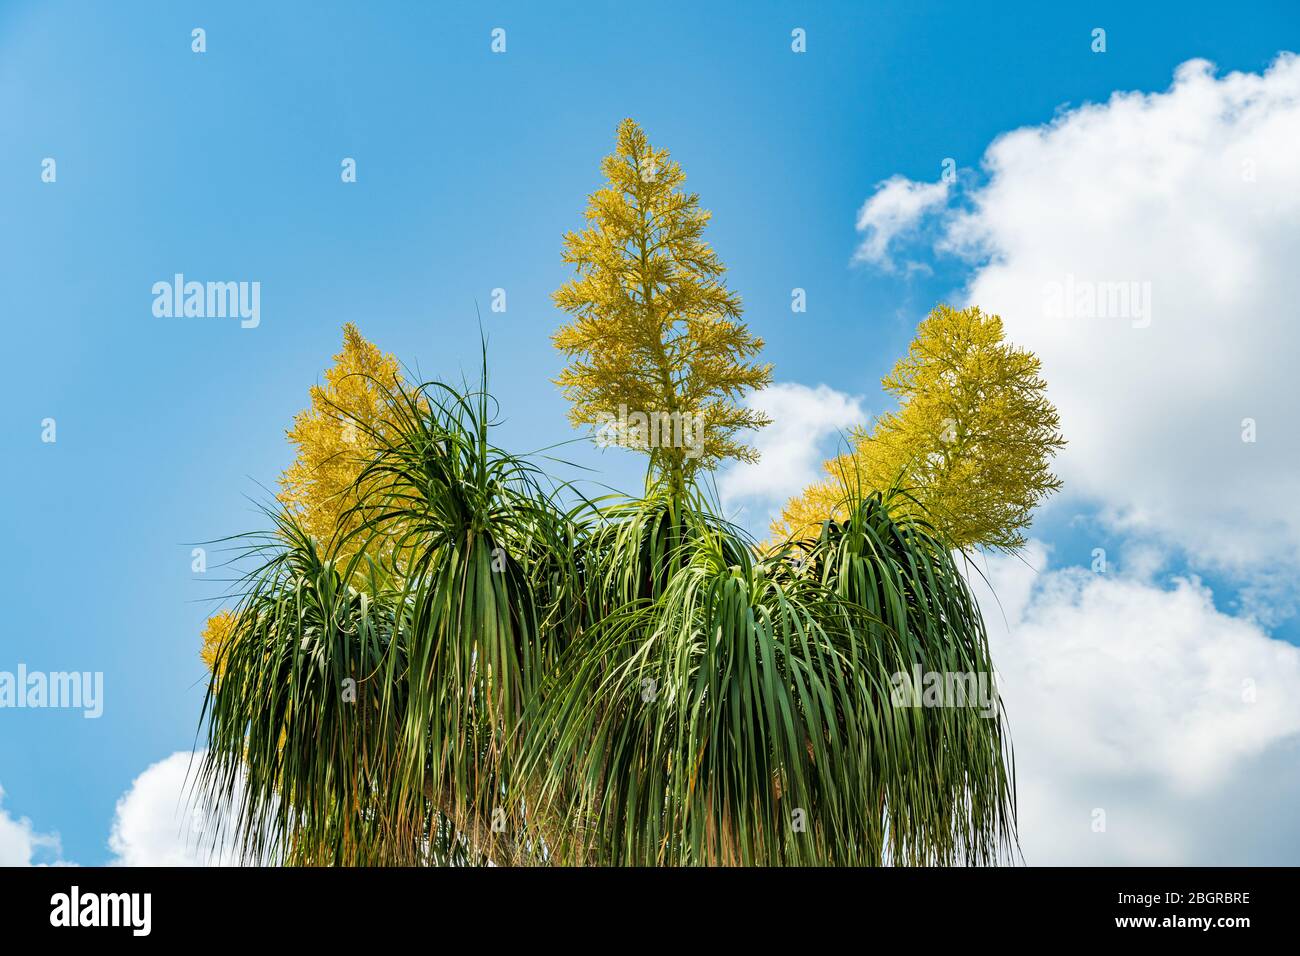 Ponytail palm a.k.a. elephant's foot (Beaucarnea recurvata) with yellow flowers - Pembroke Pines, Florida, USA Stock Photo